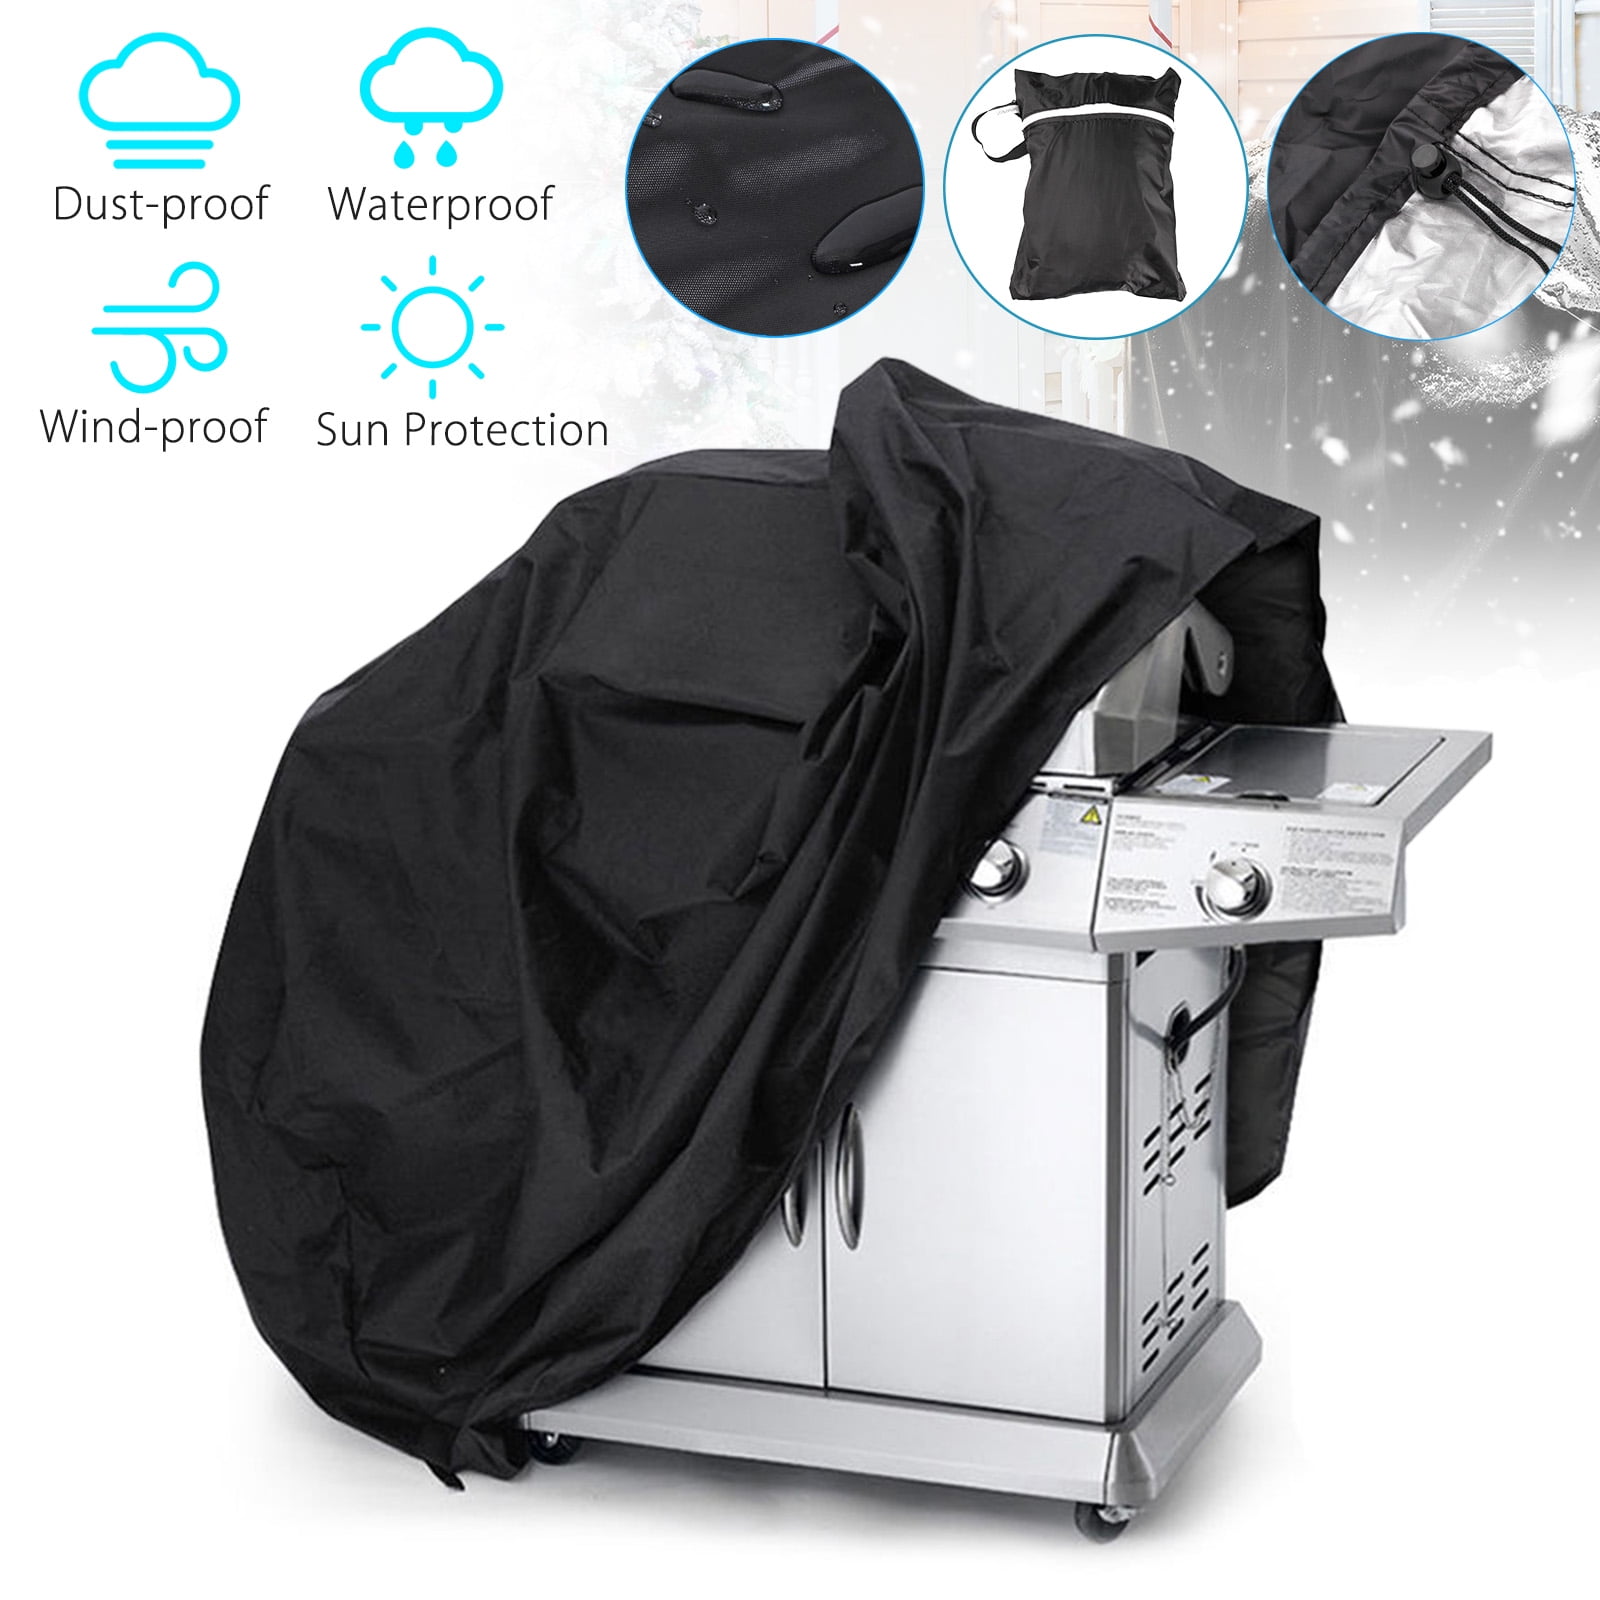 TOPNEW BBQ Gas Grill Cover 48 Inch, Black 600D Heavy Duty Waterproof UV Resistant Weather Resistant Durable Outdoor Barbeque Grill Cover for Most Grill